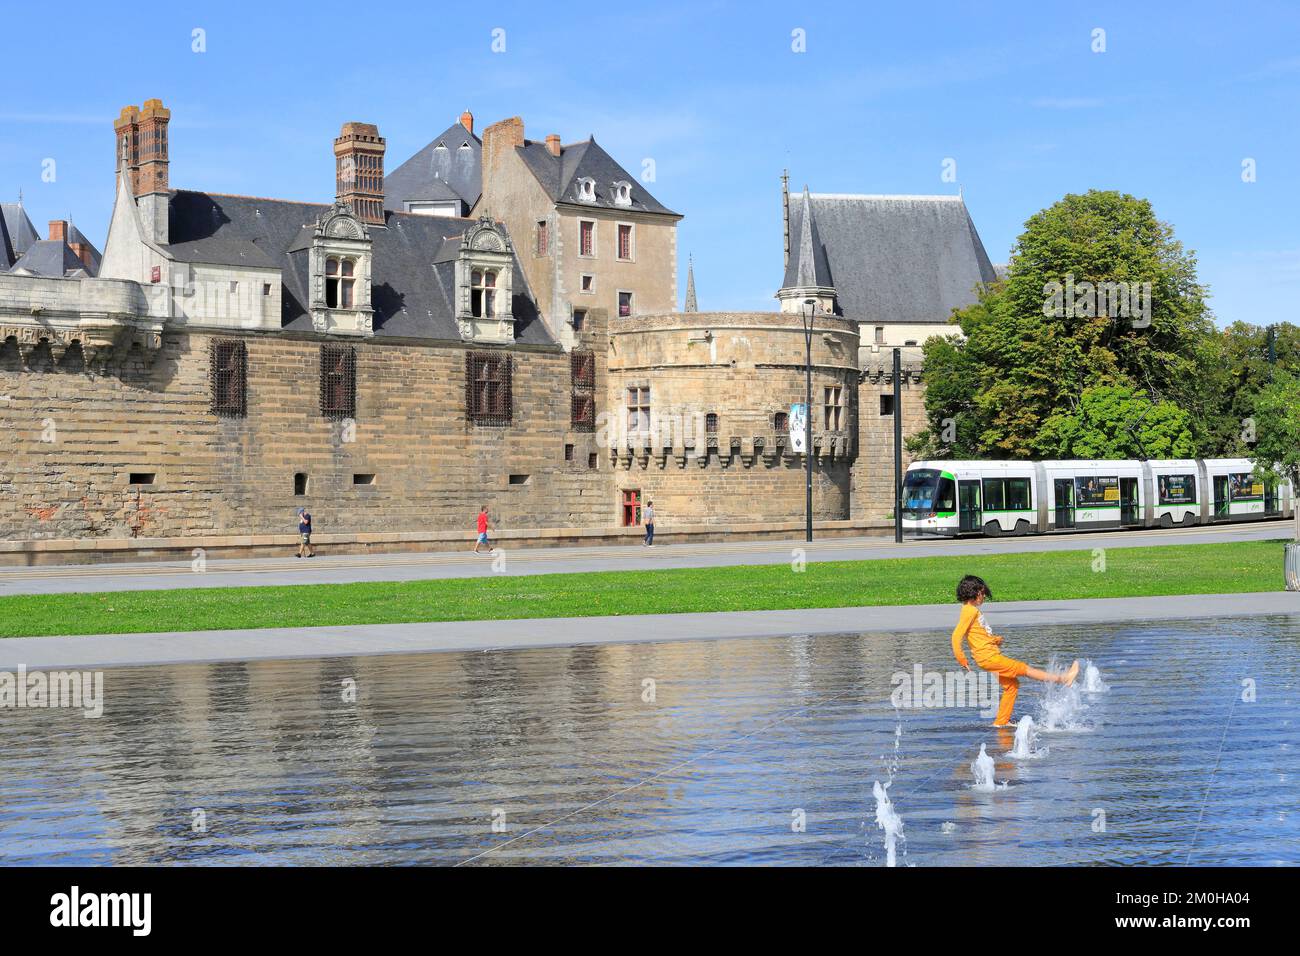 France, Loire Atlantique, Nantes, Elisa Mercoeur square, child playing with the water mirror designed by the architect Bruno Fortier with the tramway and the castle of the Dukes of Brittany in the background Stock Photo